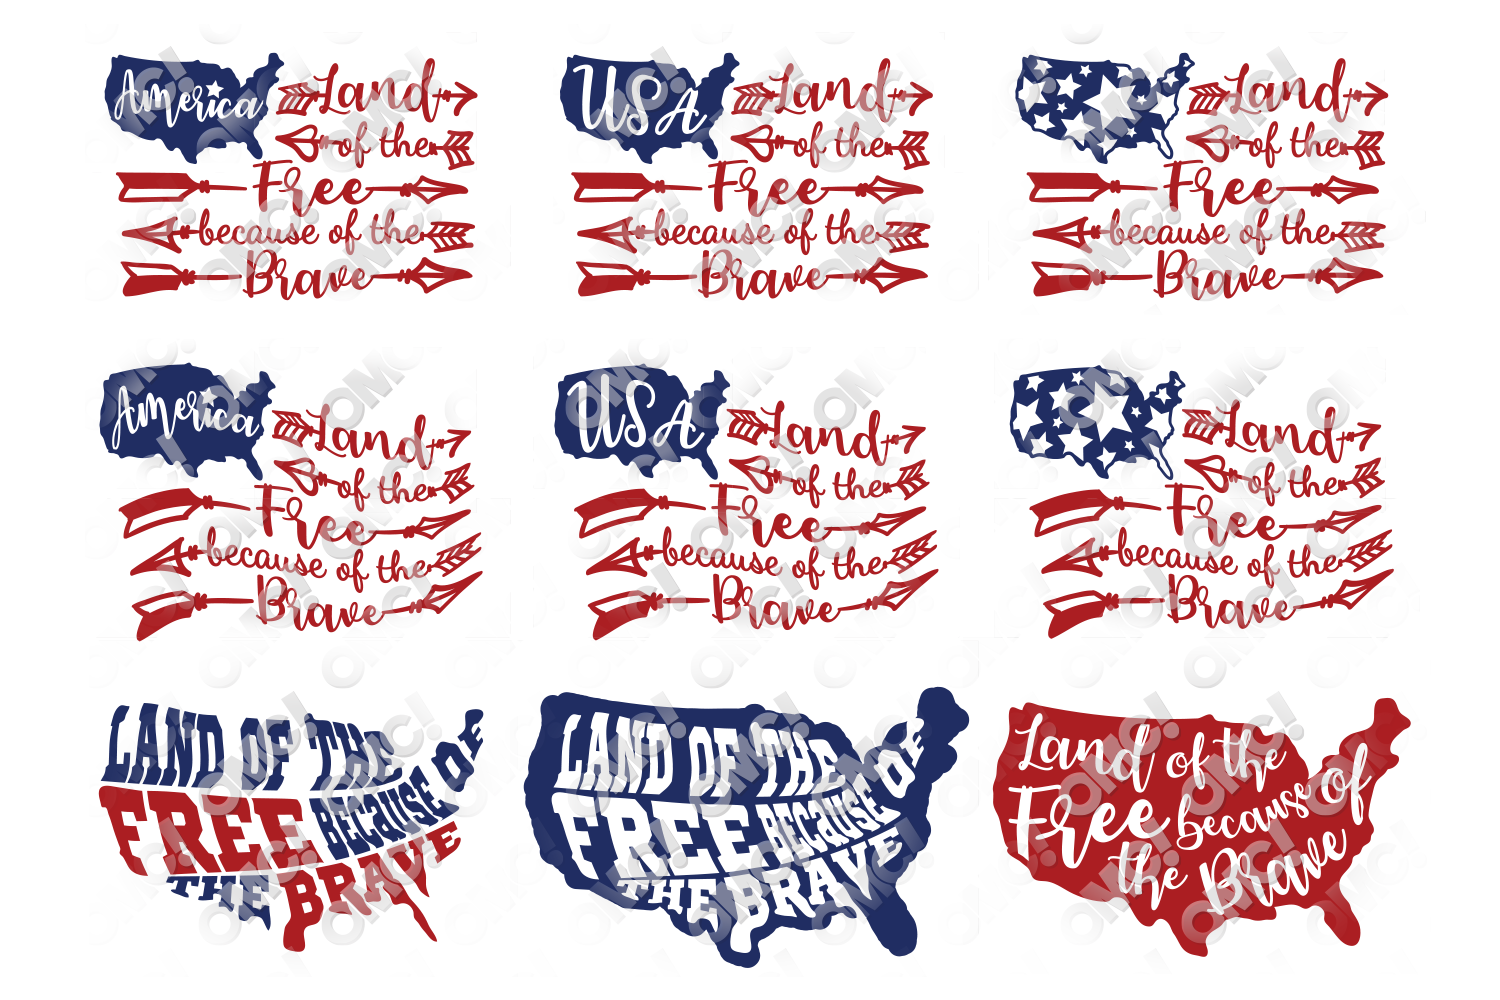 Download Land Of The Free Because Of The Brave SVG, DXF, PNG, EPS,JPG